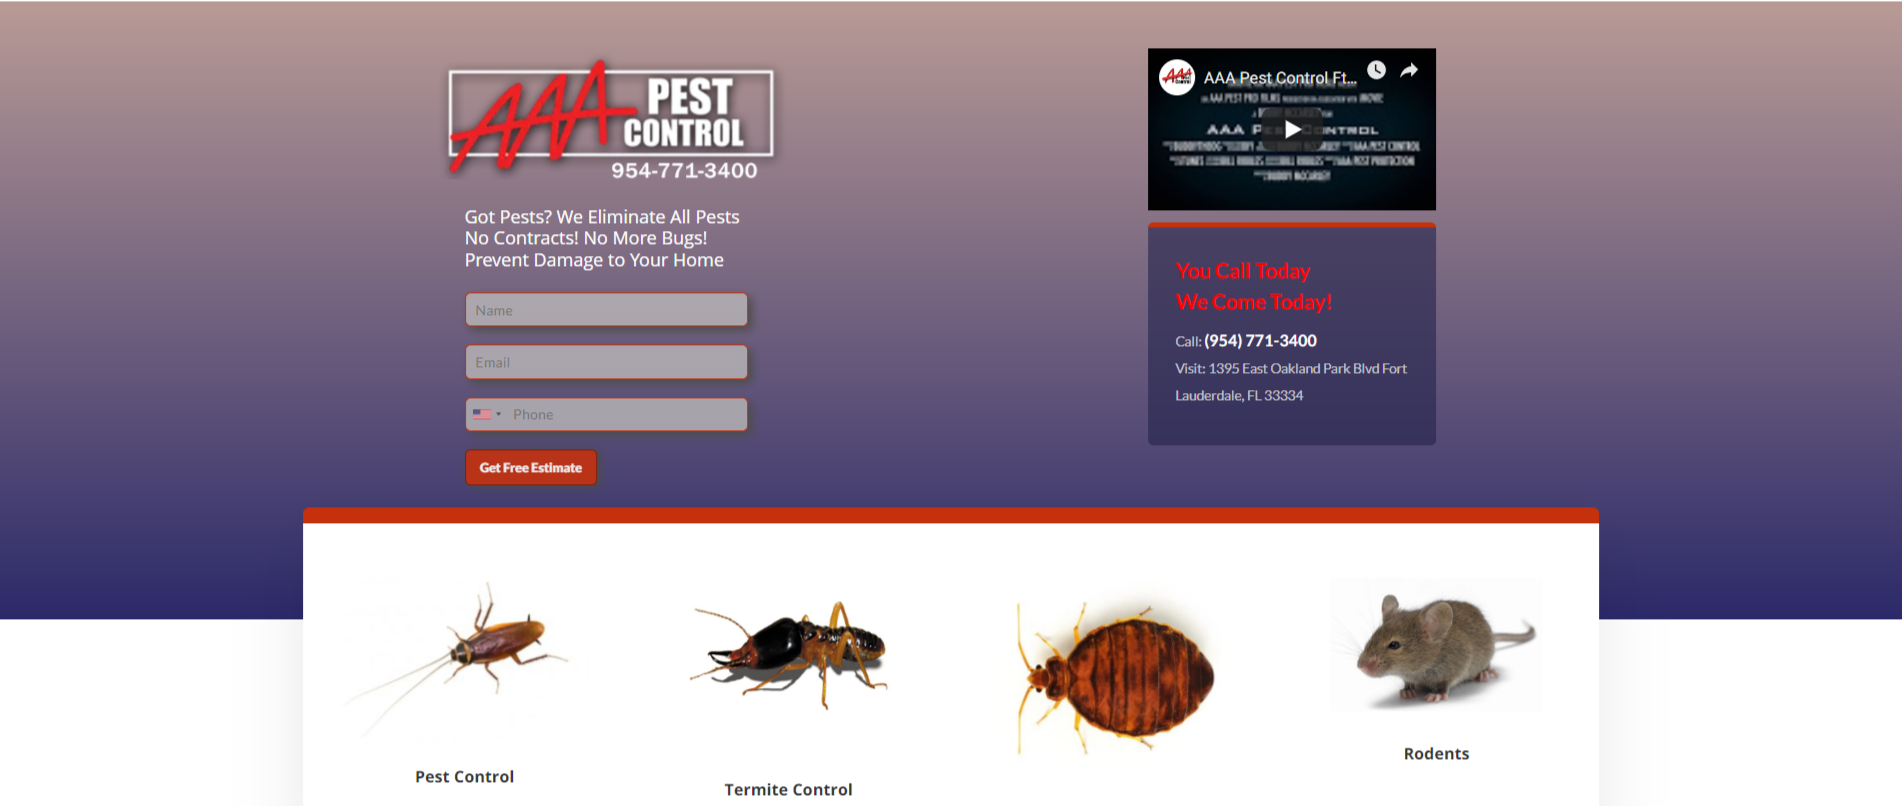 Pest Control Services In South Florida (2)